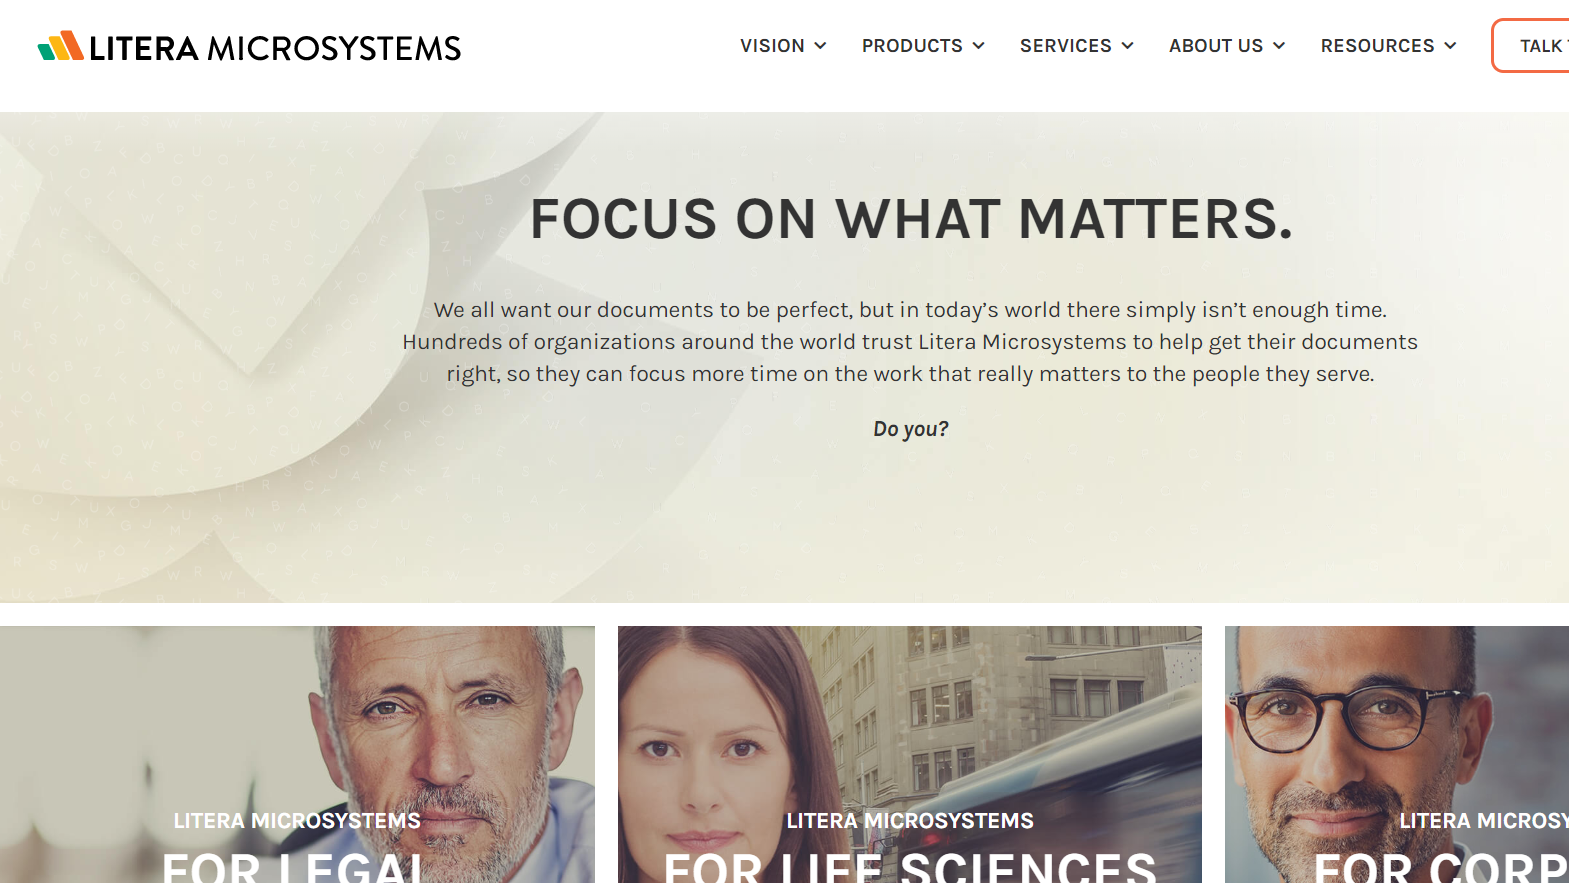 Litera Microsystems Is Sold to Hg Private Equity Group